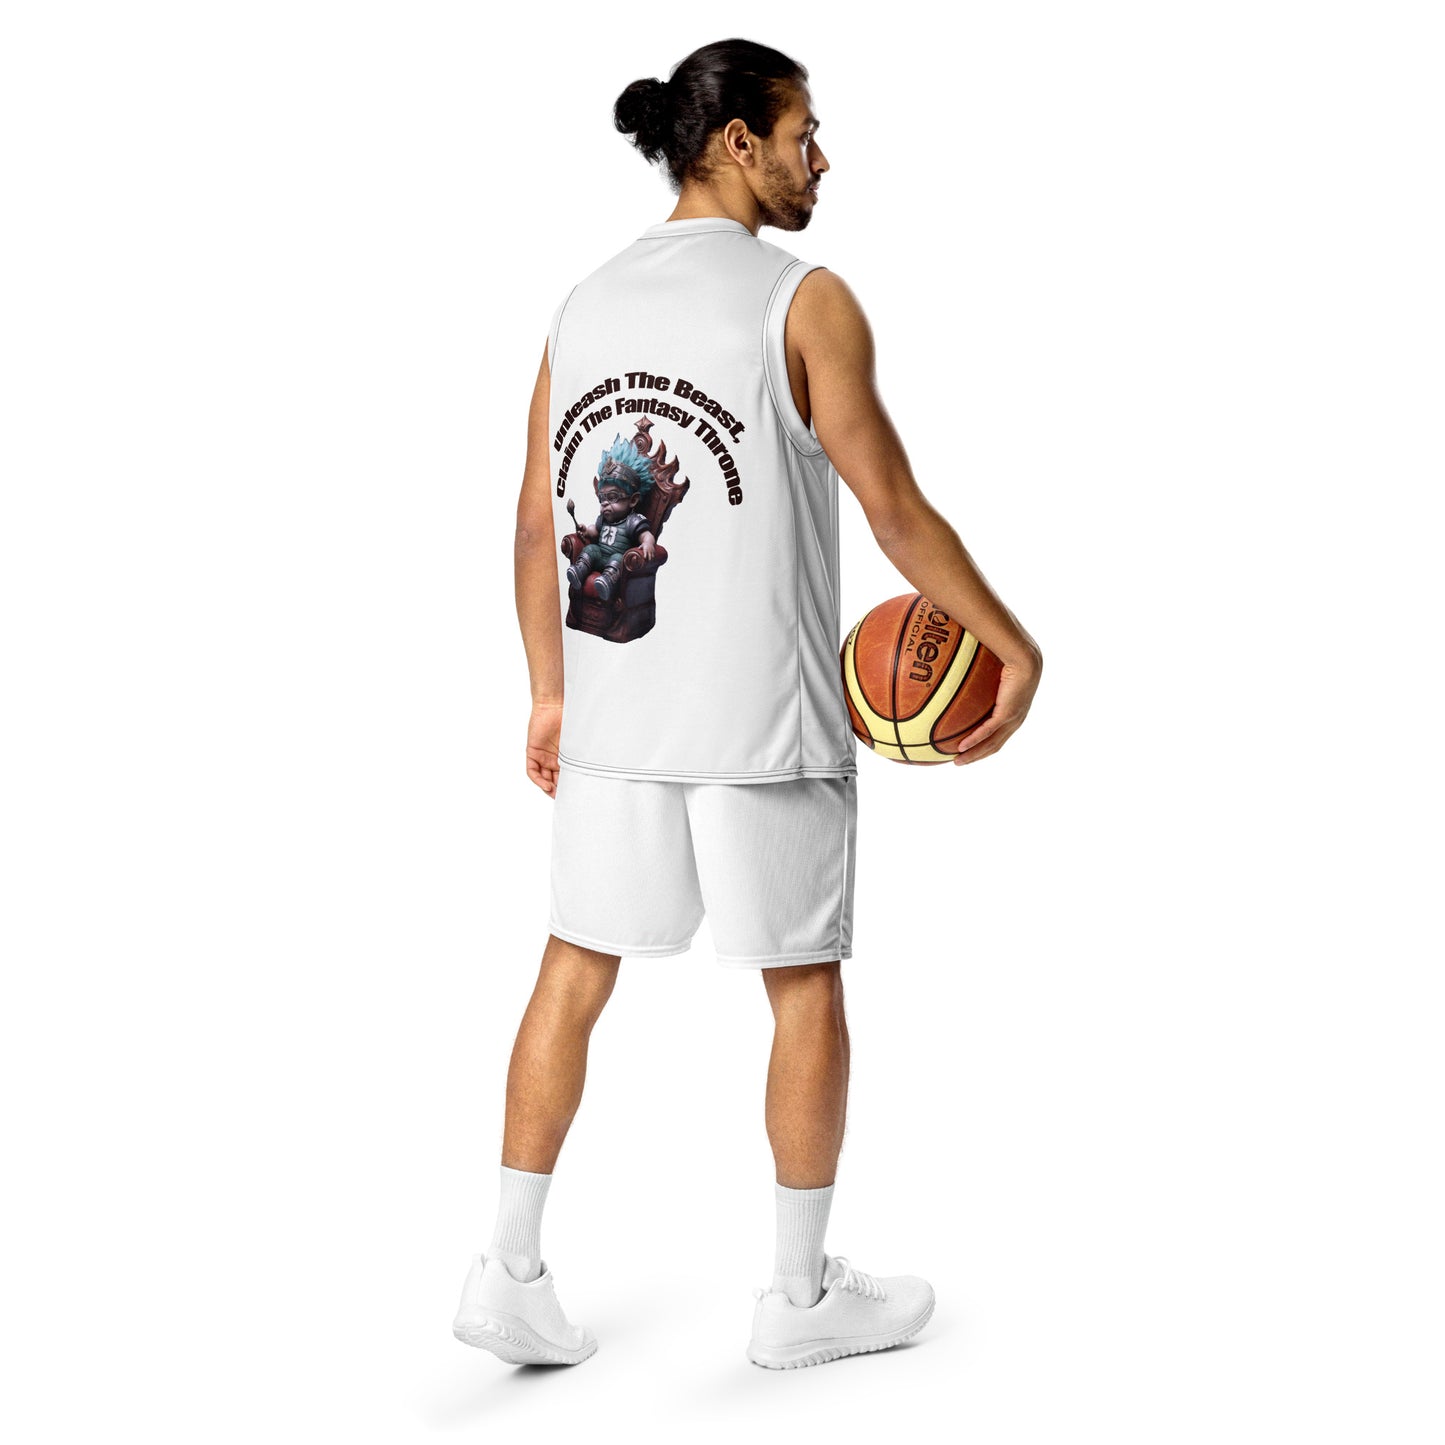 Gridiron King Recycled unisex basketball jersey